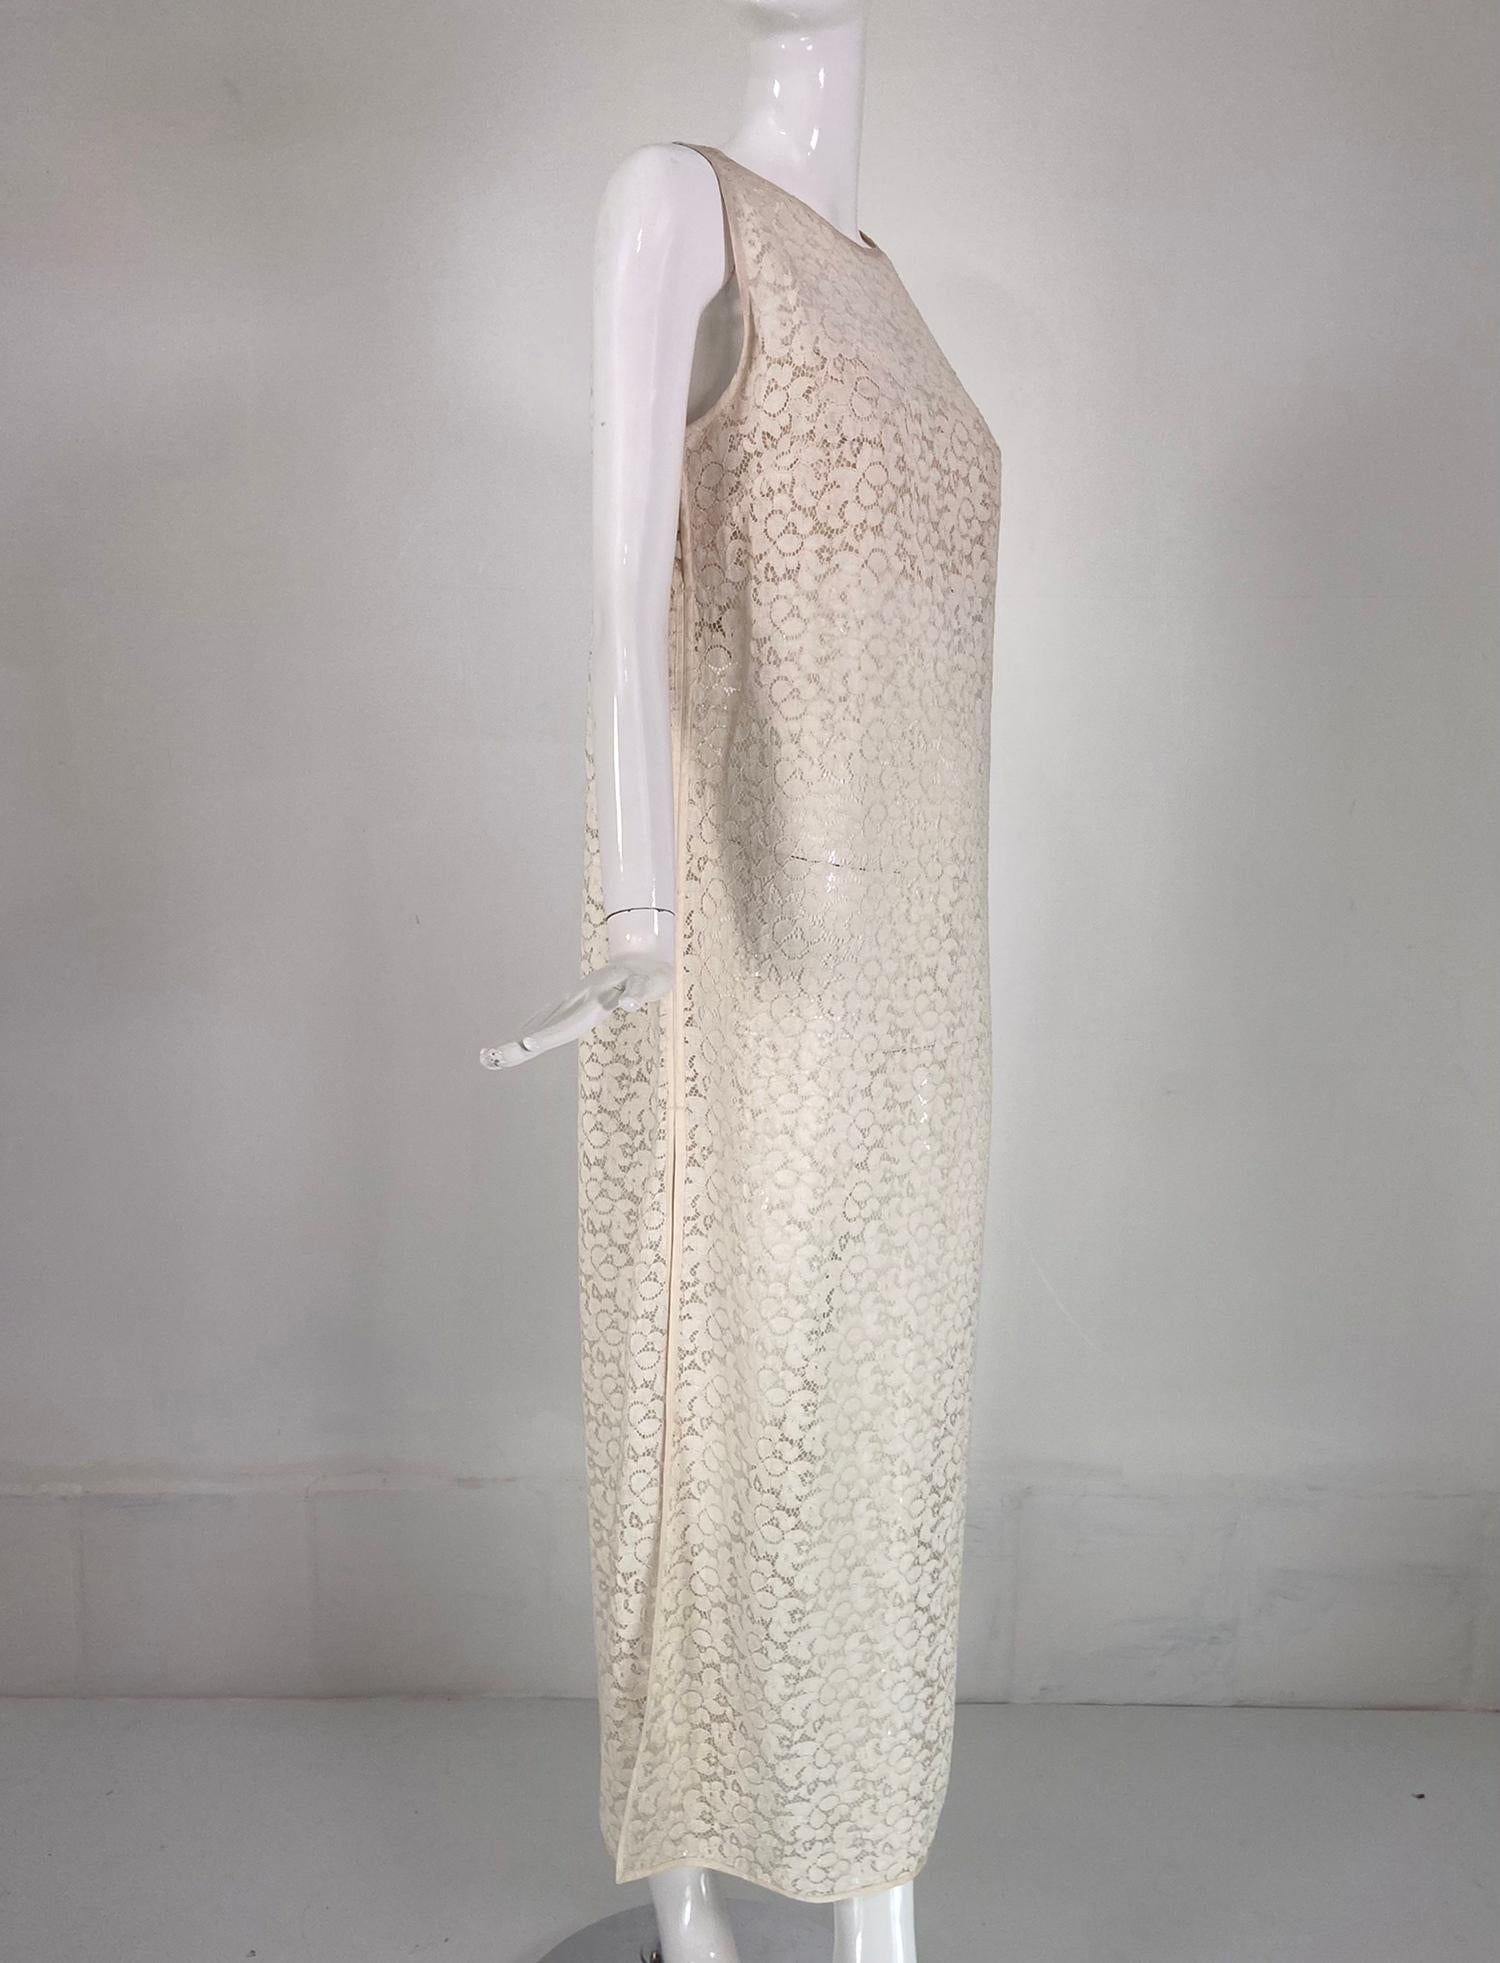 Jiki Monte Carlo Creations off white lace maxi shift dress. Sleeveless, jewel neck maxi dress of off white textured lace, trimmed in off white satin. Slip on dress closes at the shoulders with self button and loops, it also closes at each under arm